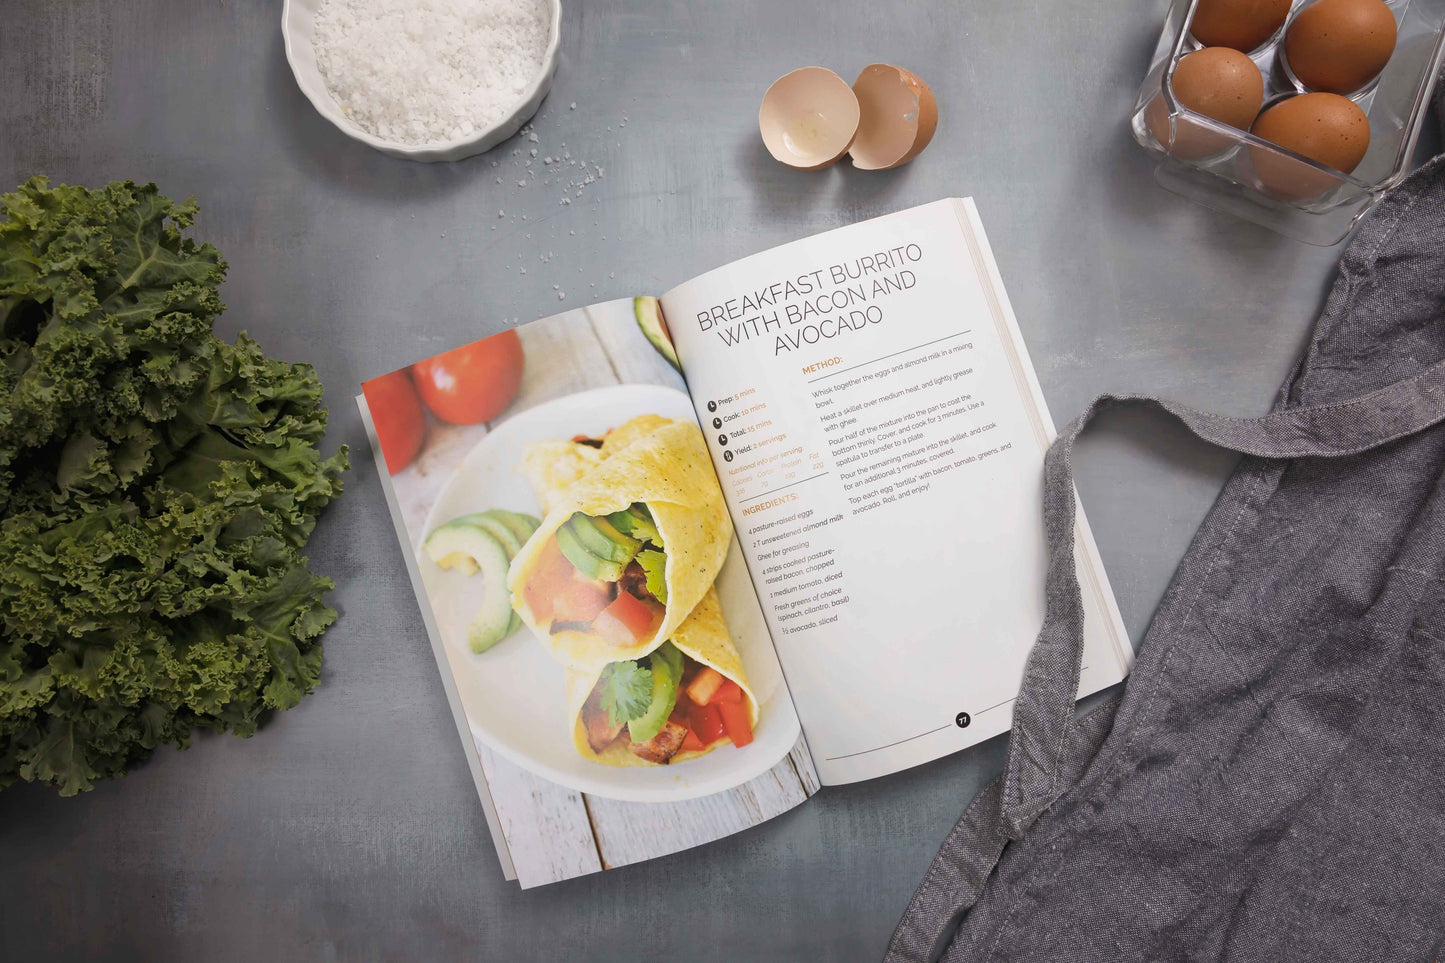 An open Keto breakfast cookbook is placed on a marble surface, alongside eggs, vegetables, and sea salt.